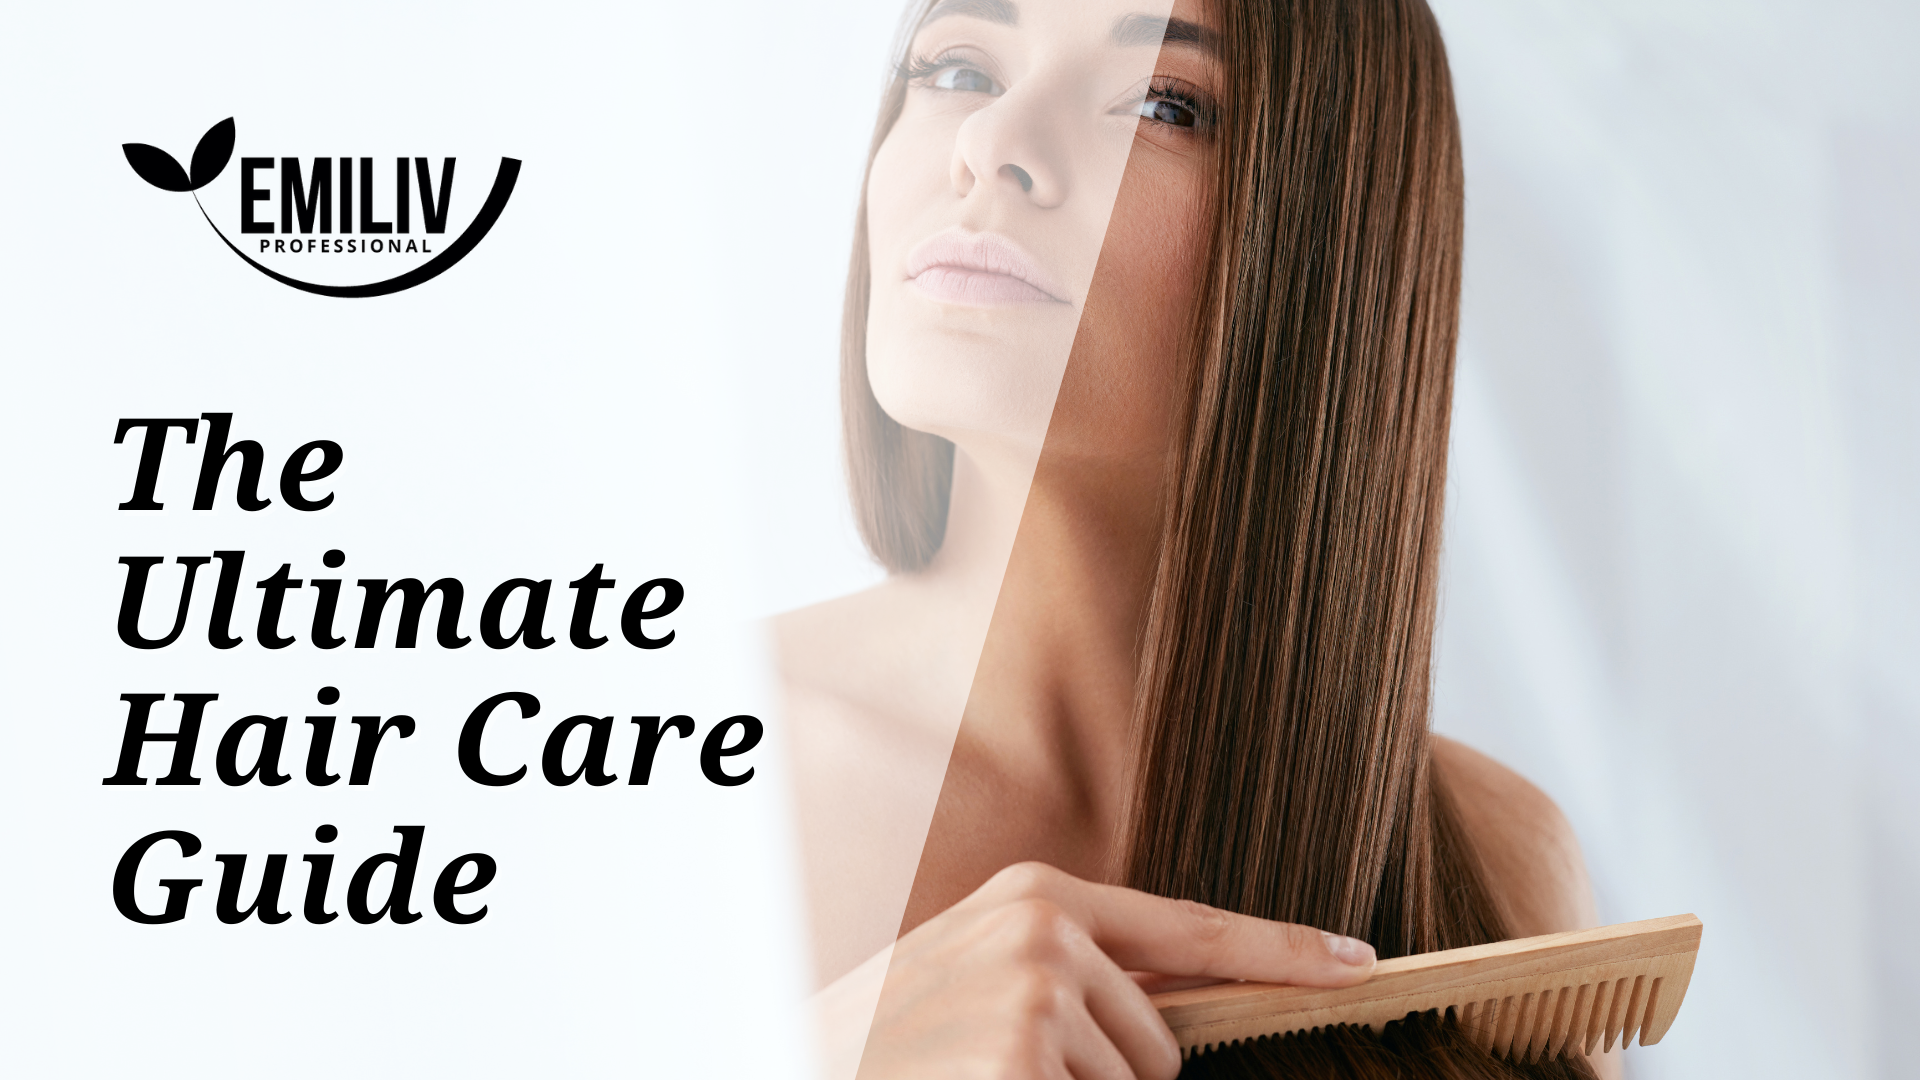 The Ultimate Hair Care Guide